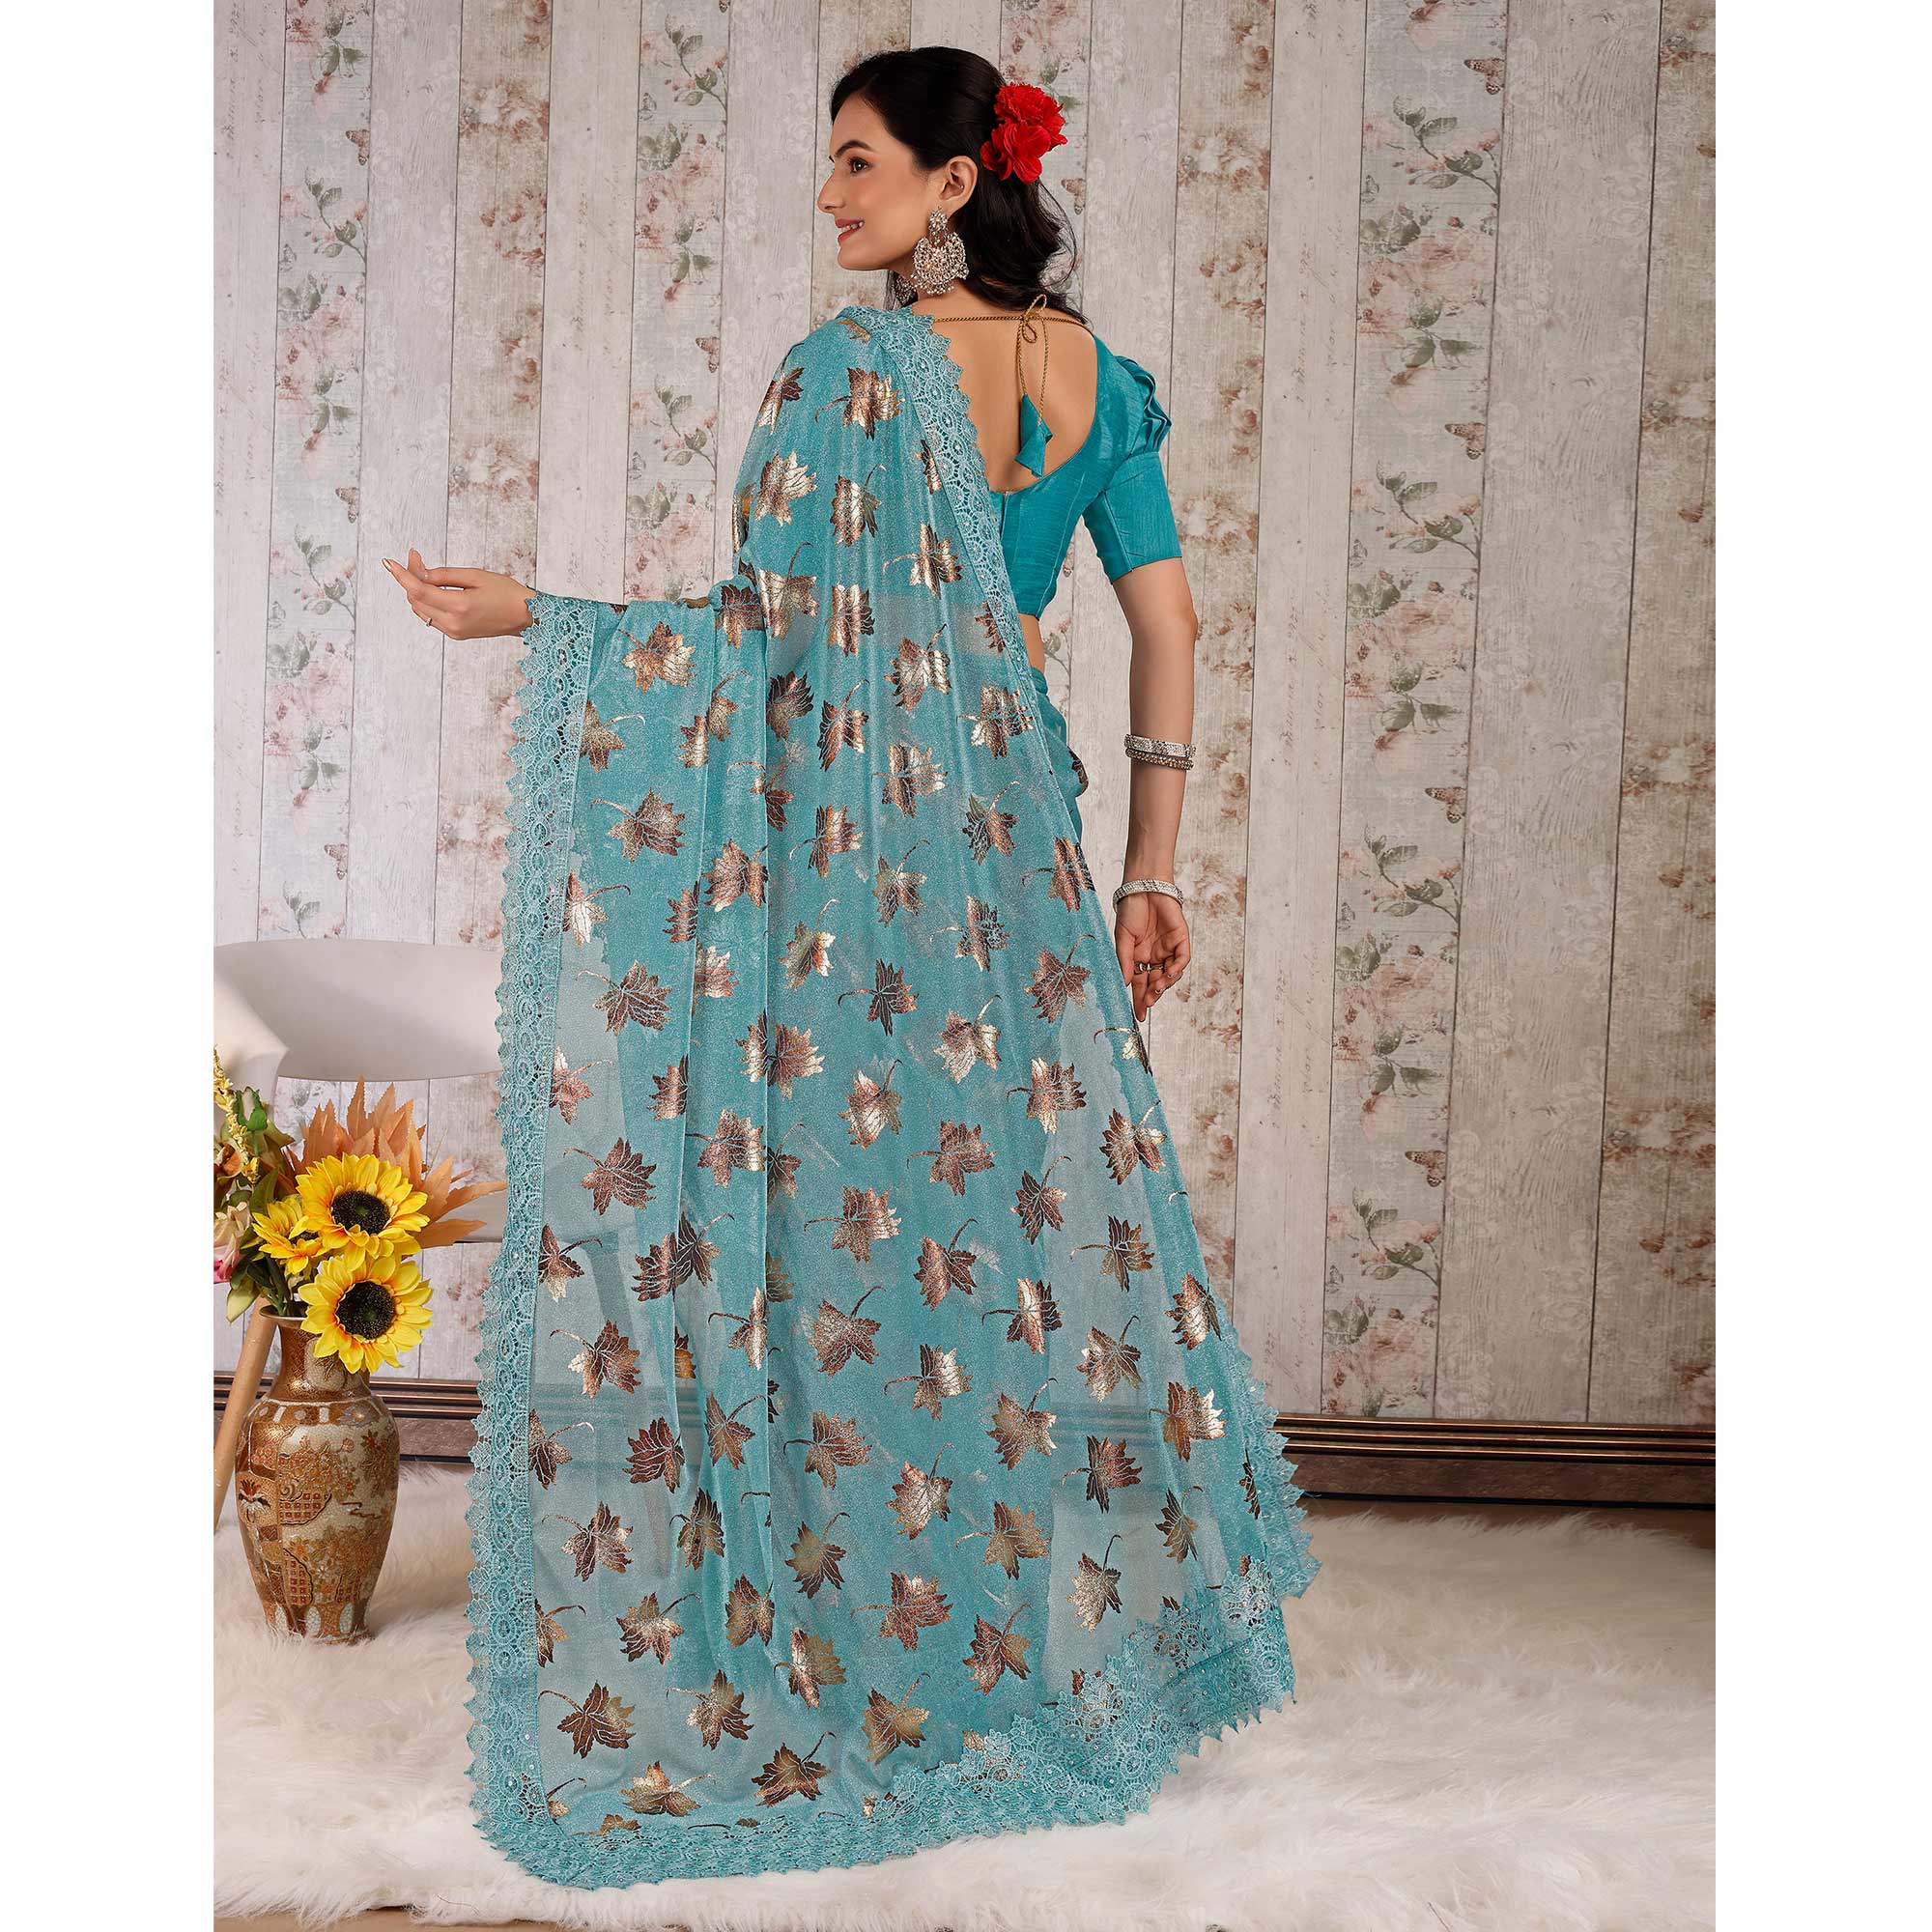 Blue Foil Printed Lycra Saree With Embroidered Lace Border